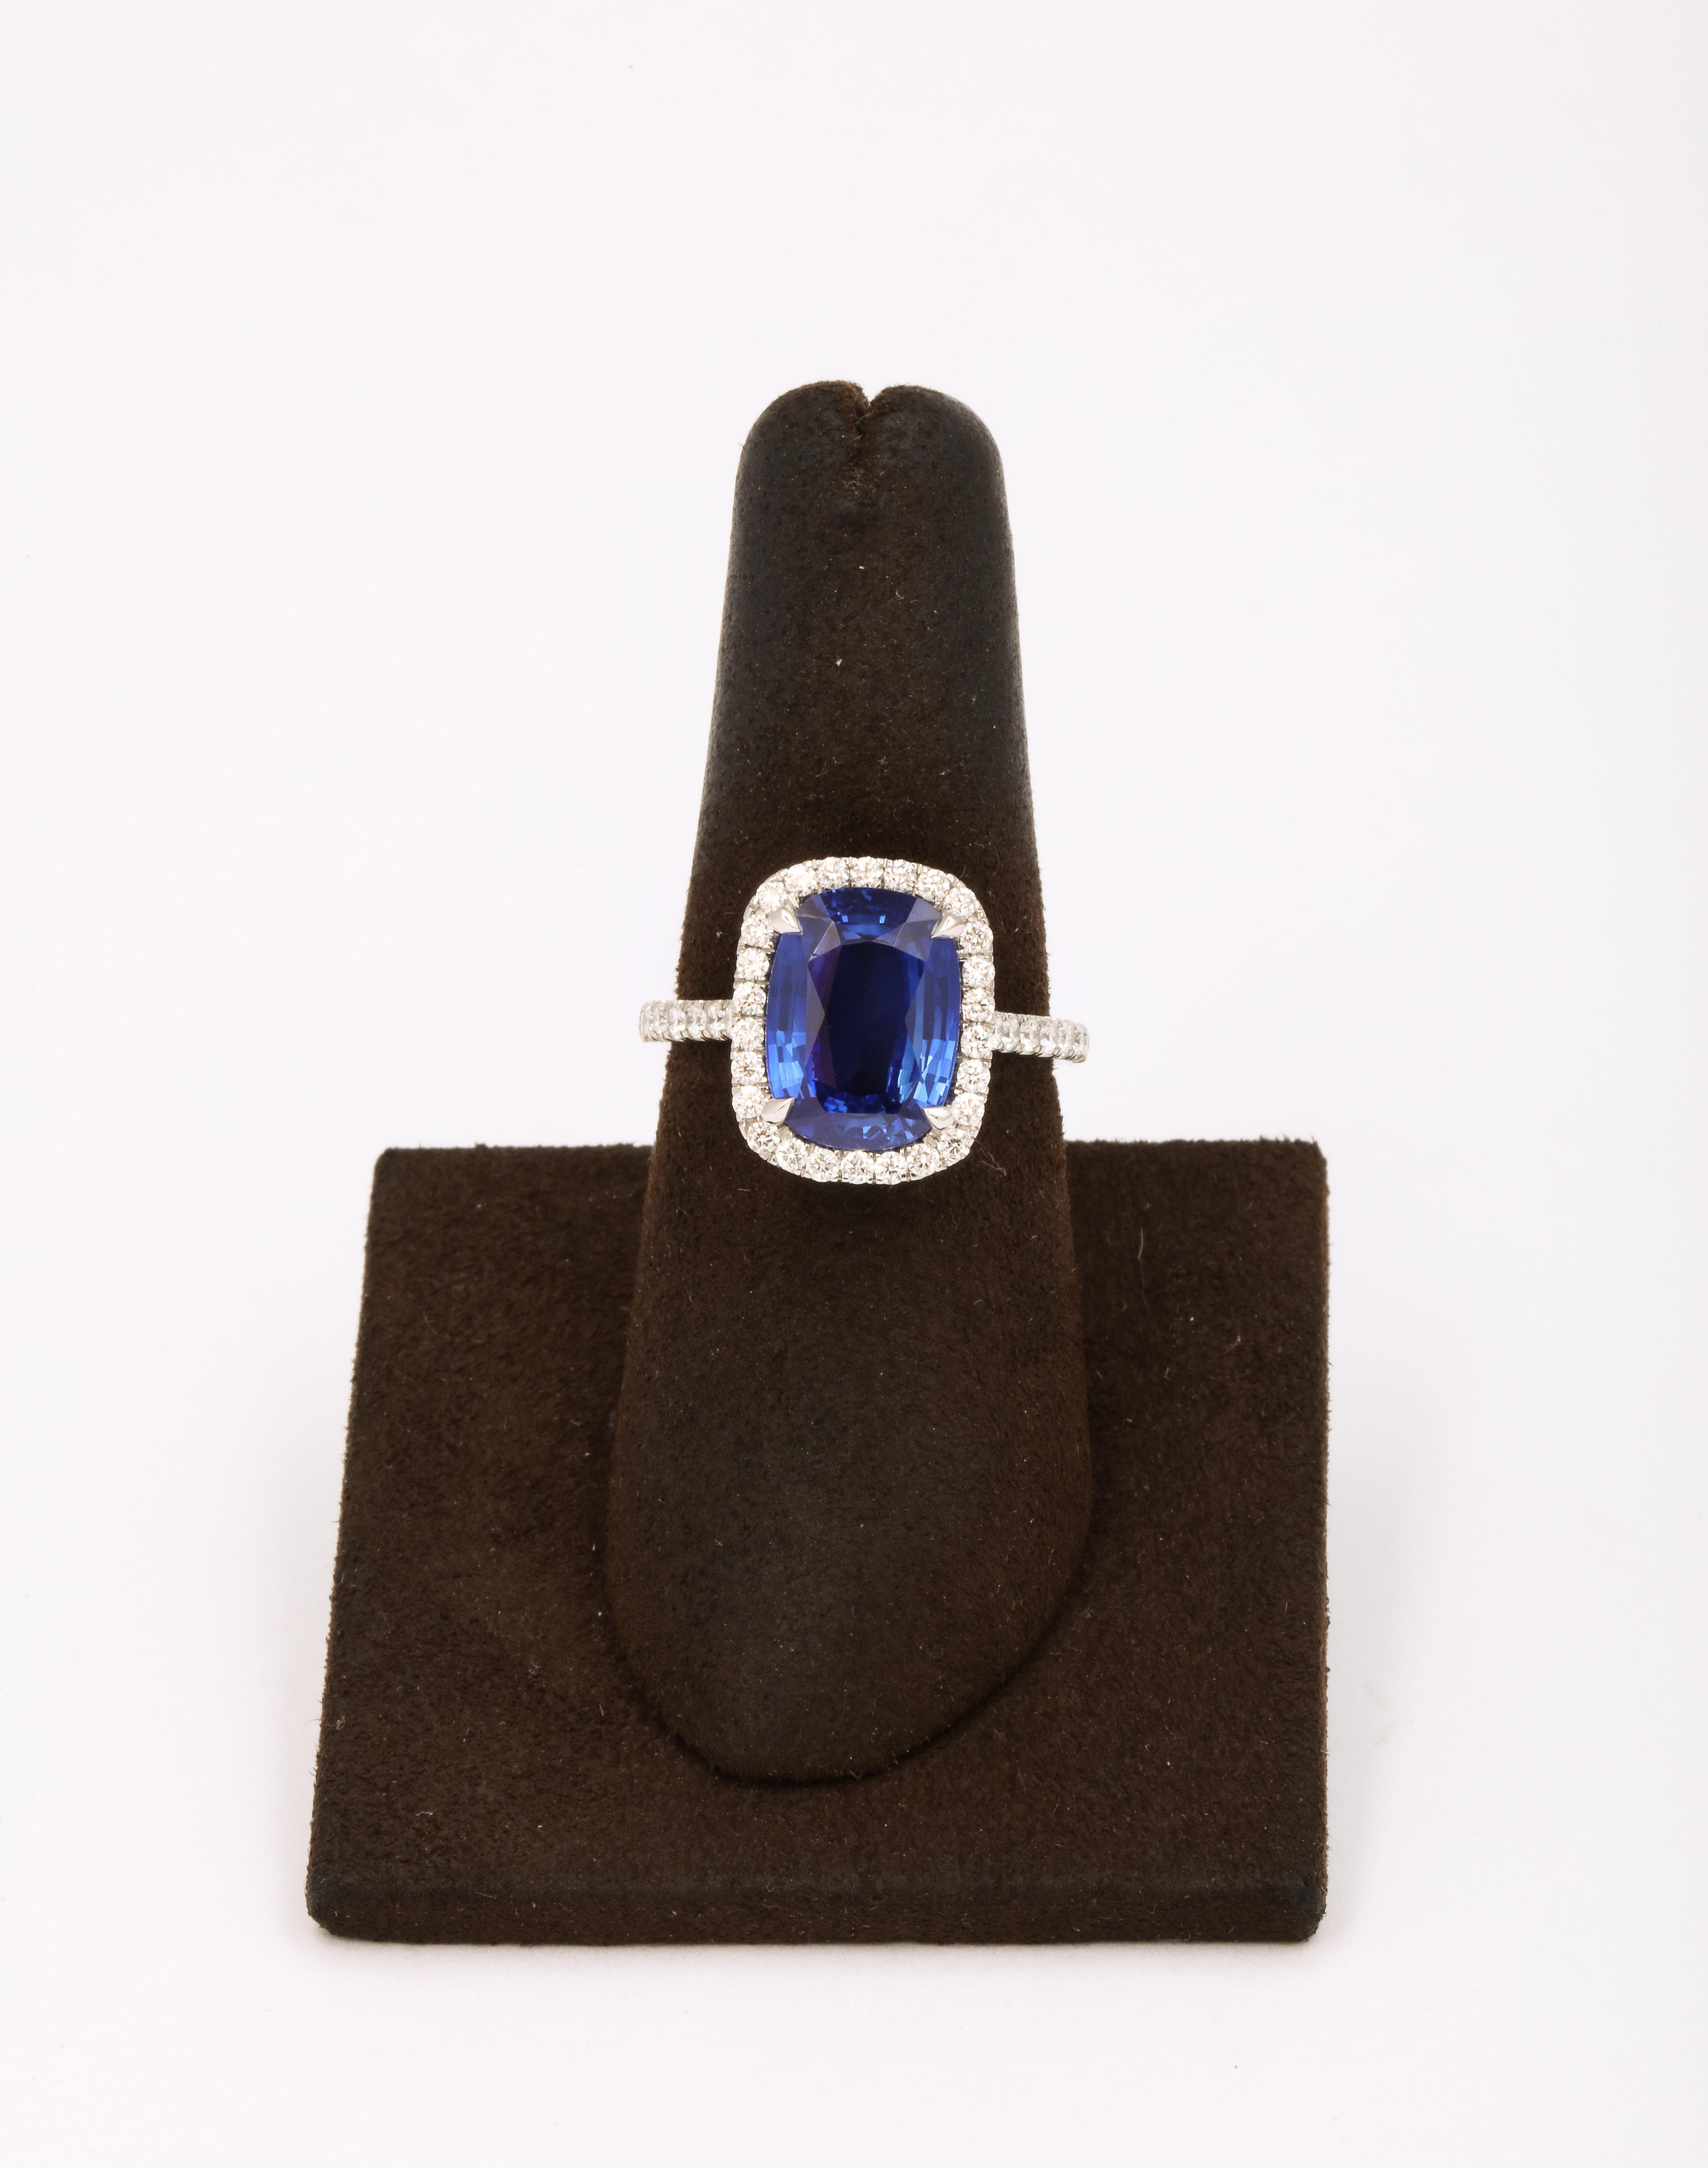 
A fabulous stone in the most sought after elongated cushion shape! 

4.71 carat Ceylon, Cornflower Blue Sapphire 

.78 carats of white diamonds 

Set in a custom made platinum diamond halo mounting. 

Currently a size 6.5 this ring can easily be